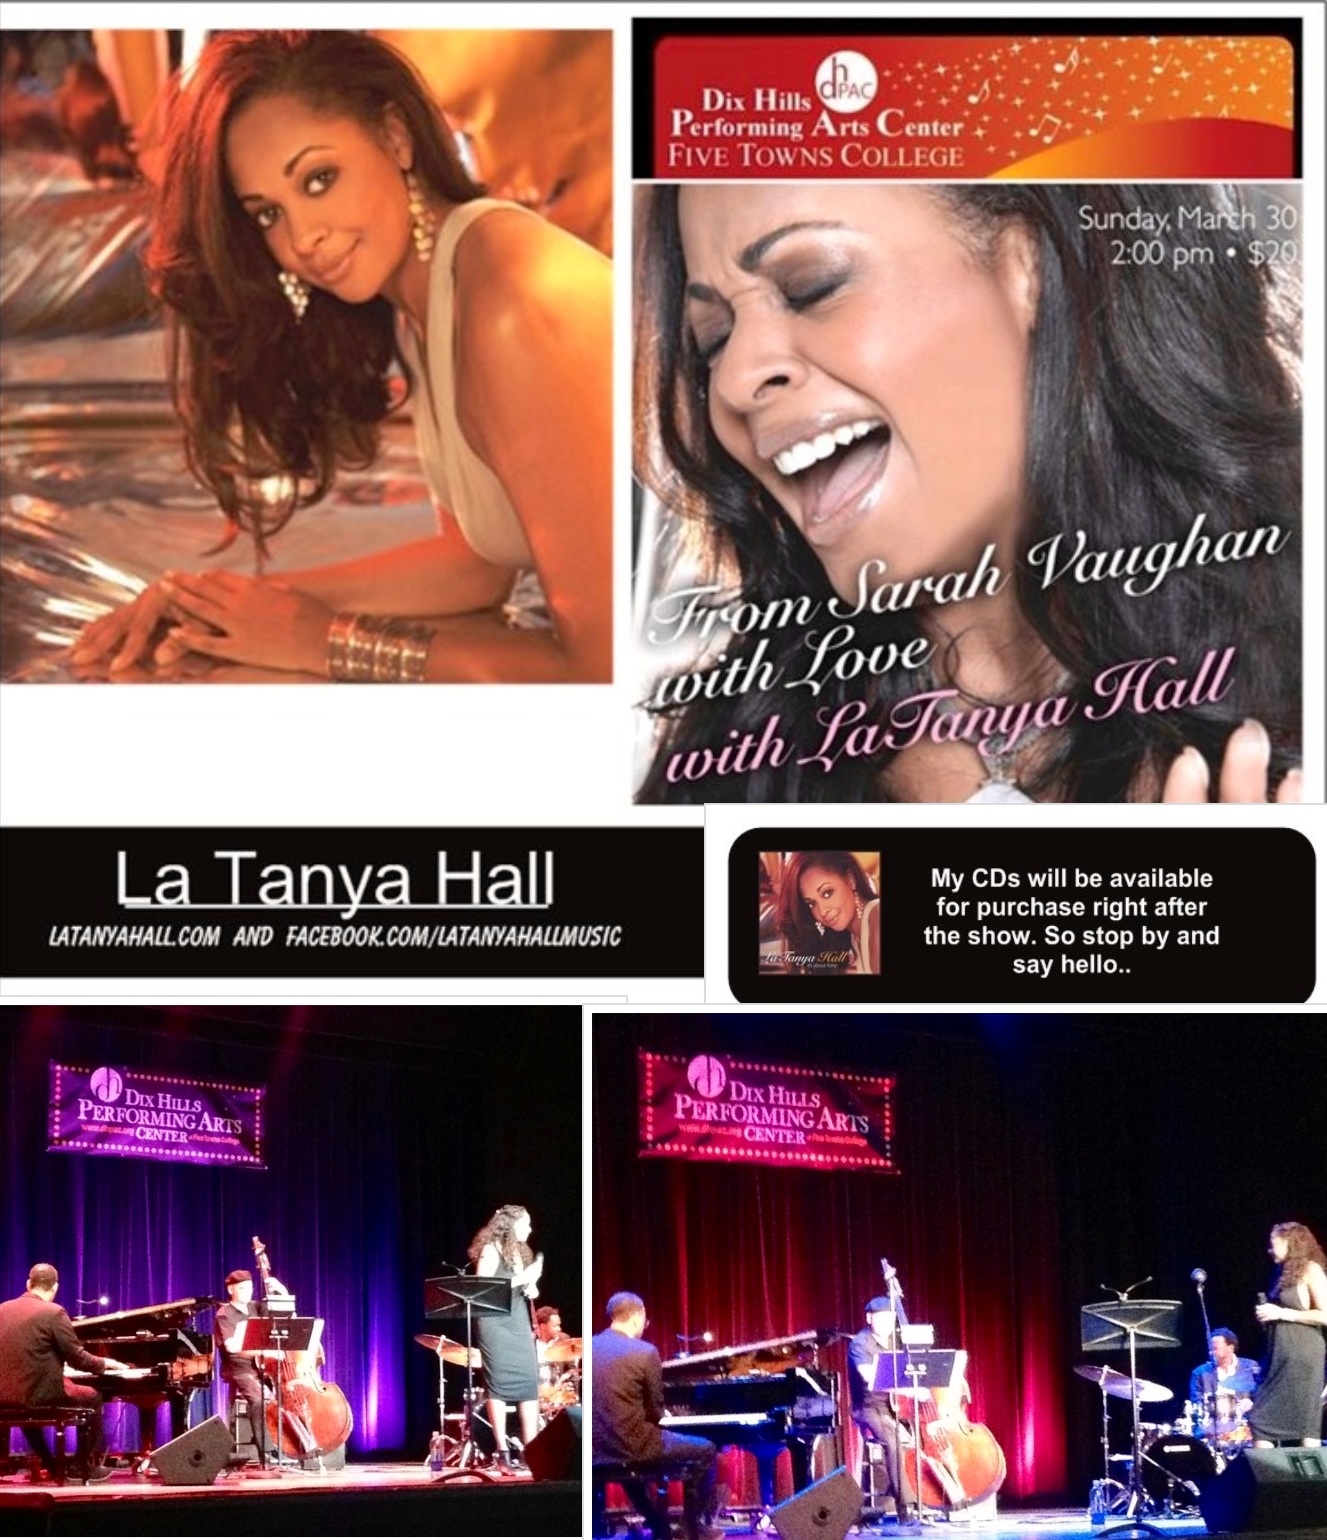 LA TANYA HALL PERFORMS “FROM SARAH VAUGHAN, WITH LOVE” mar 30 2014